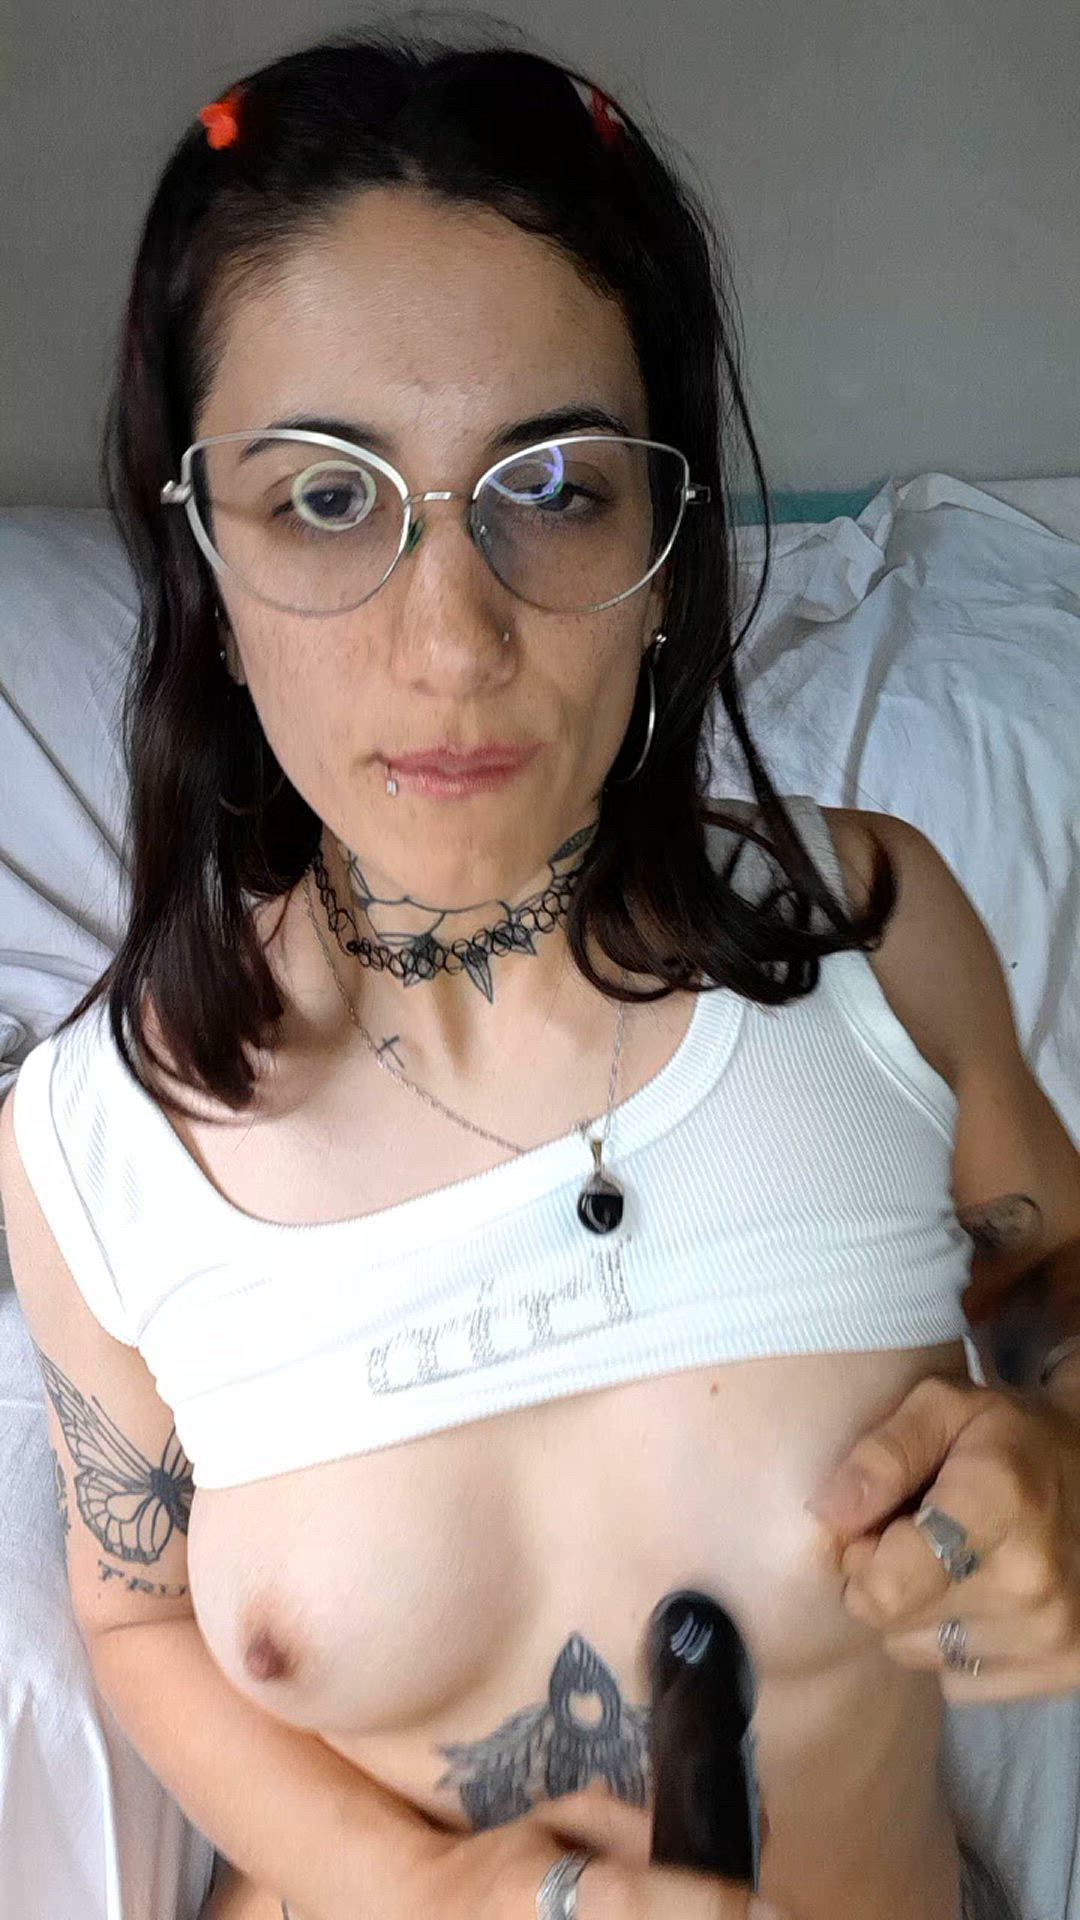 Tits porn video with onlyfans model badgalola <strong>@badgalolaa</strong>